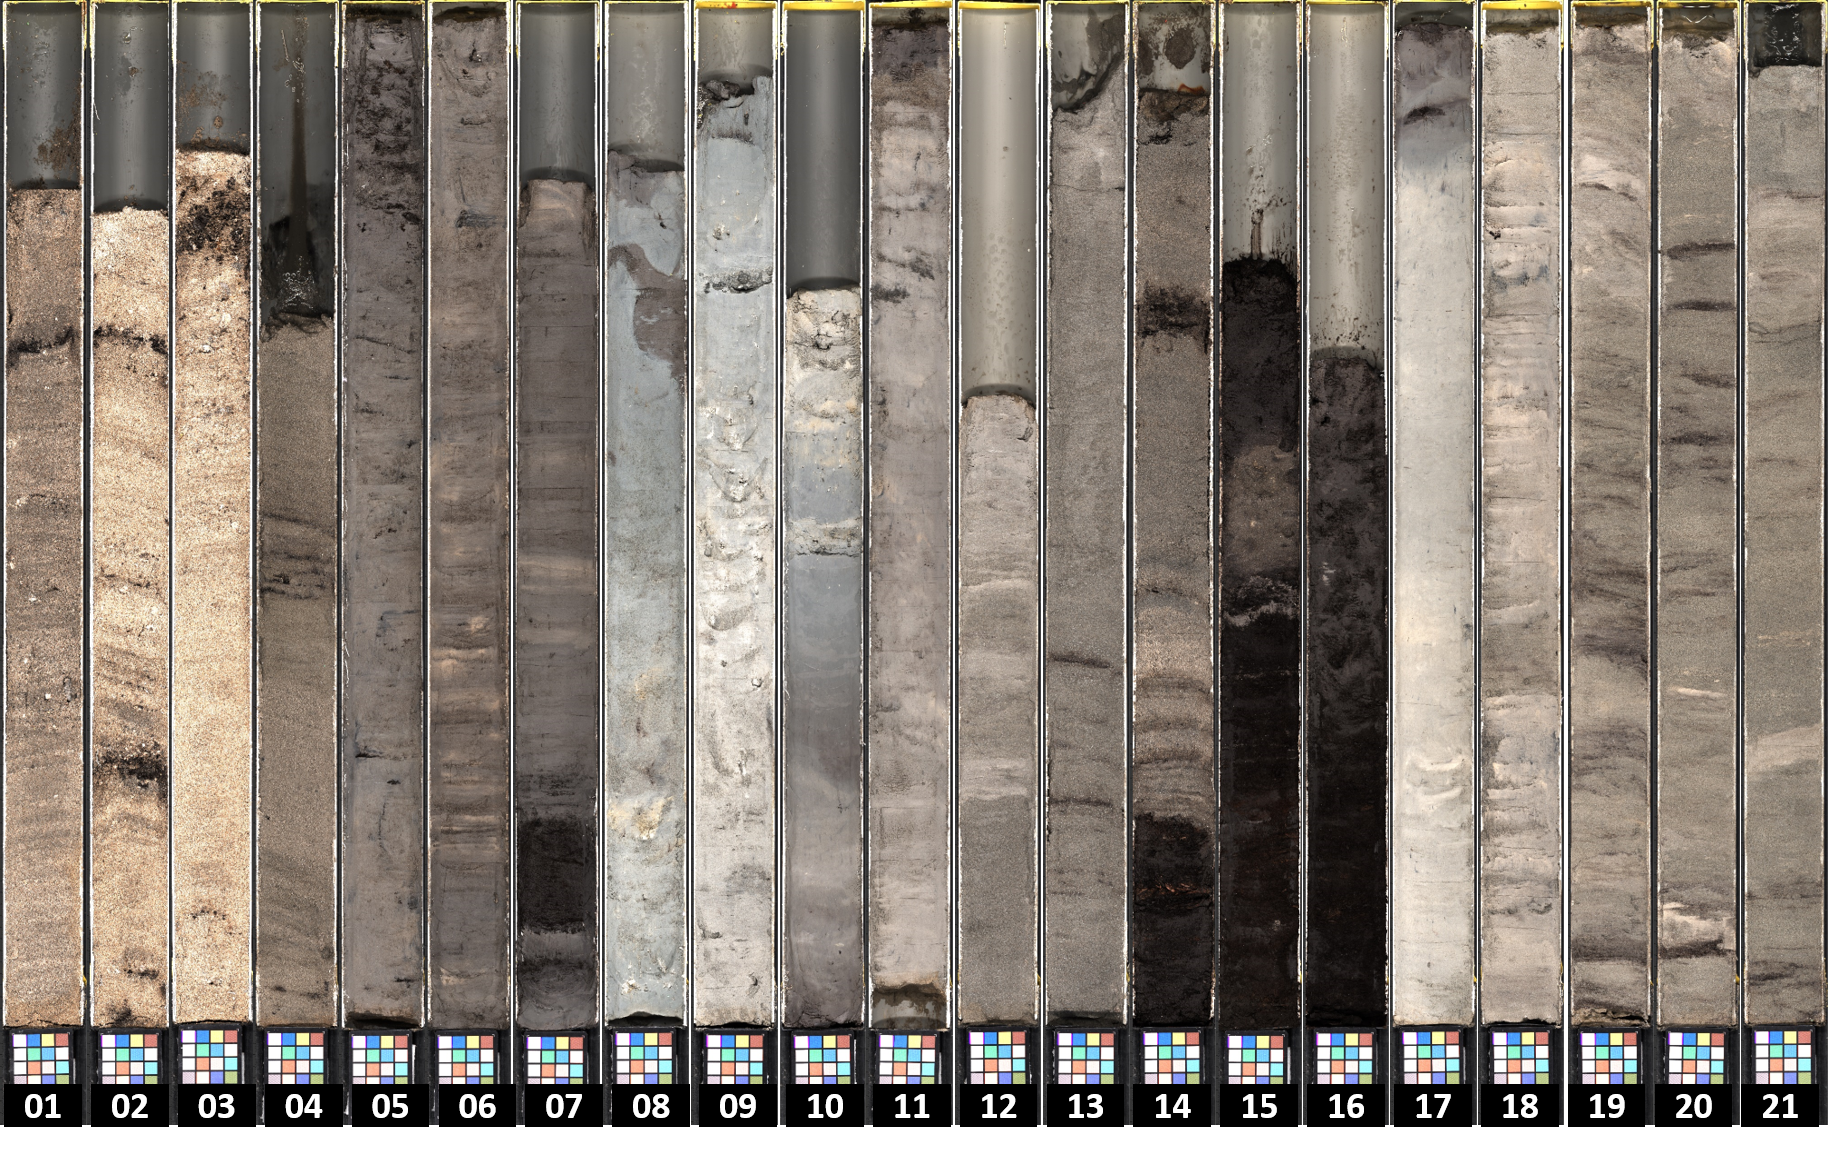 Photograph of core sections showing the different sediment types from one of the RISeR cores